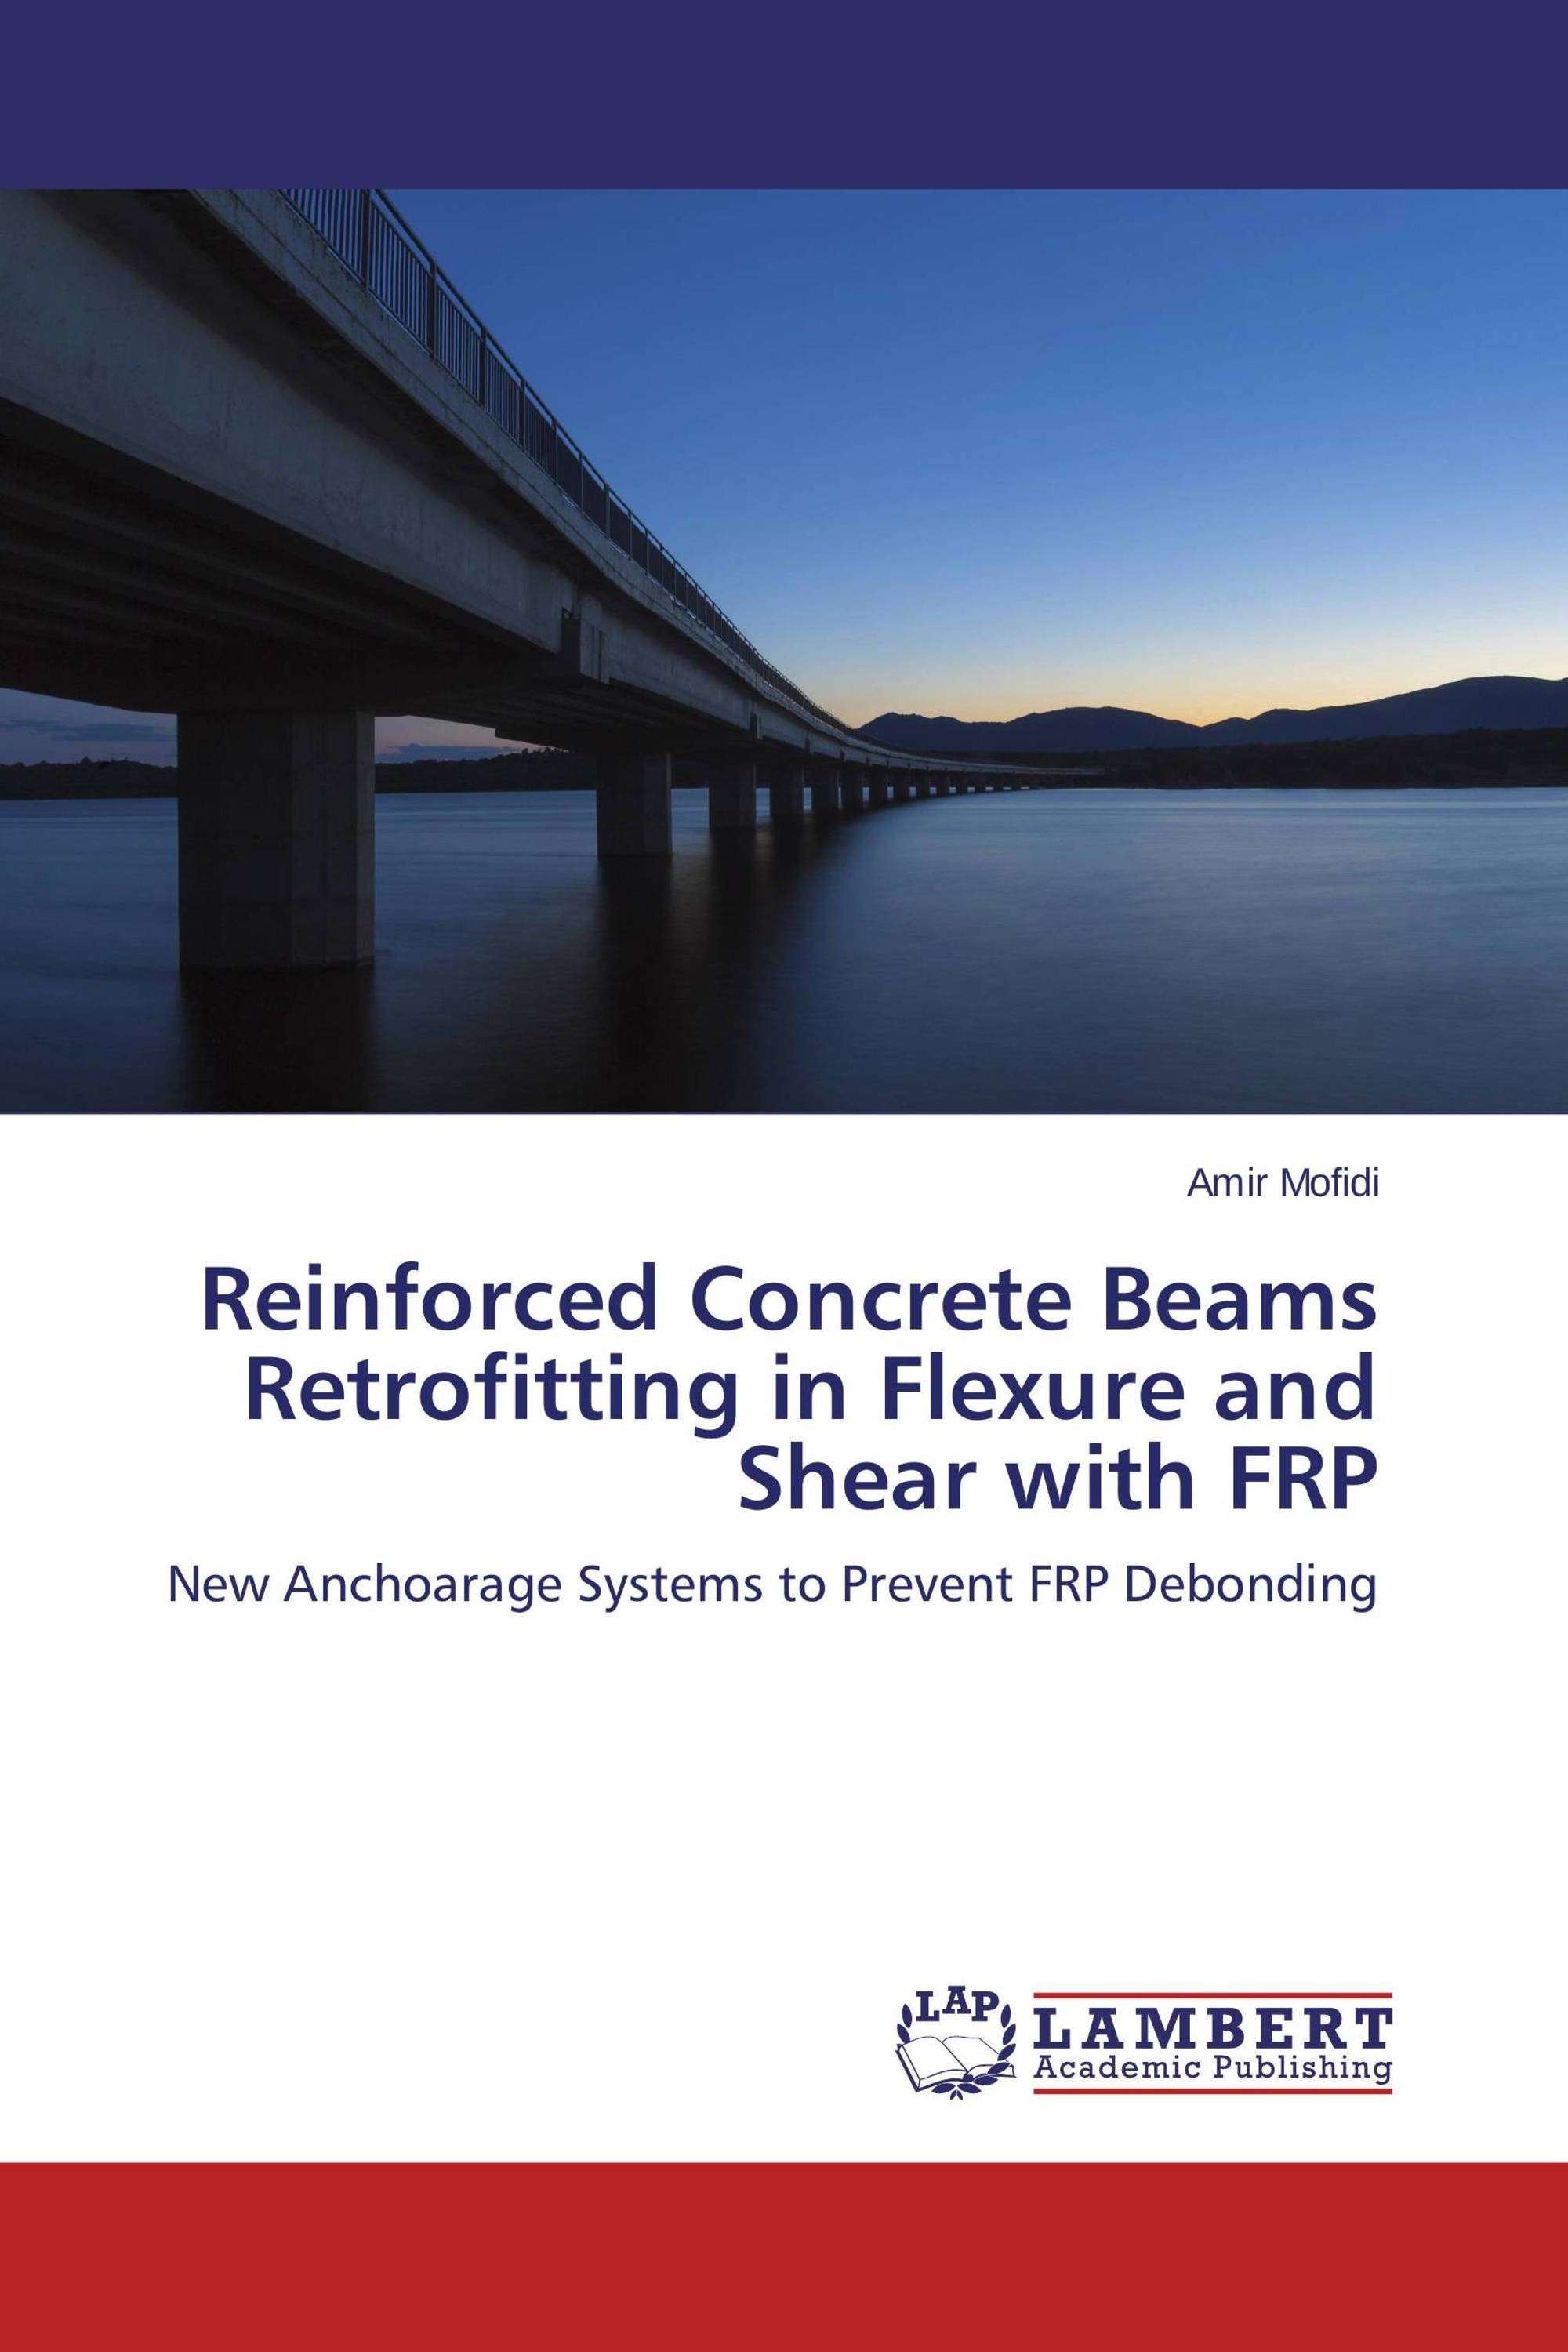 Reinforced Concrete Beams Retrofitting in Flexure and Shear with FRP